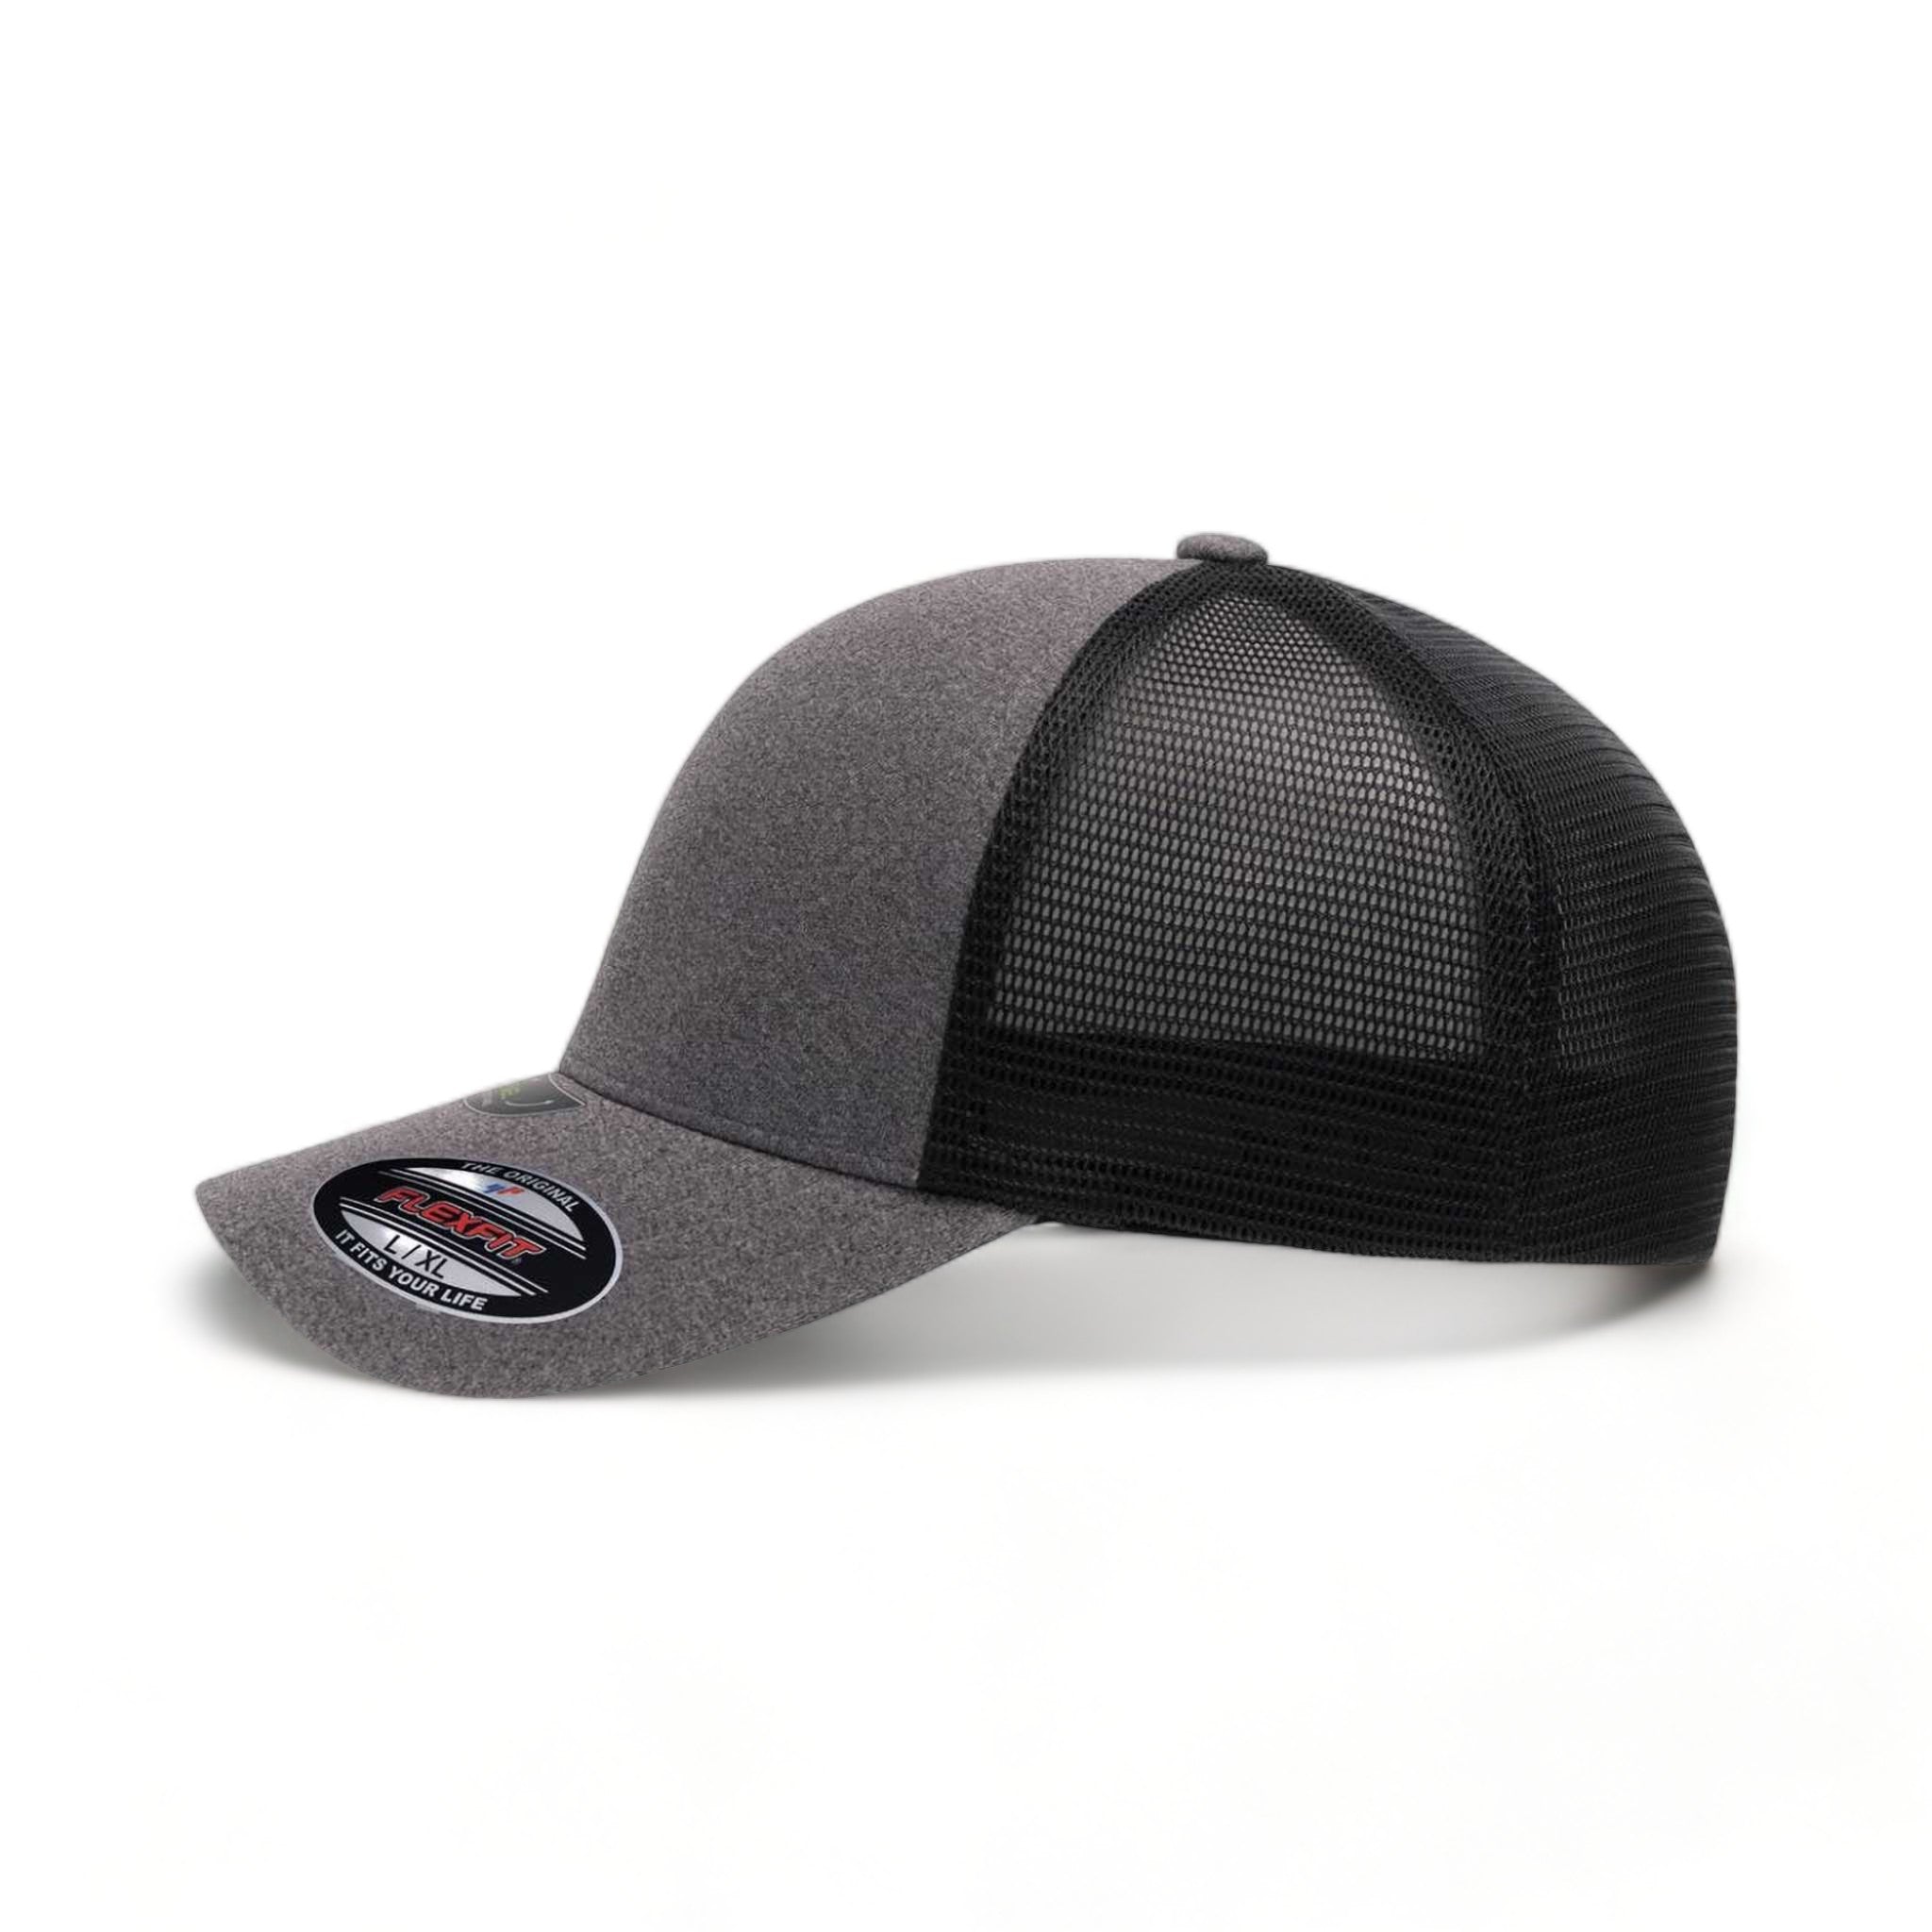 Side view of Flexfit 5511UP custom hat in mélange heather and black